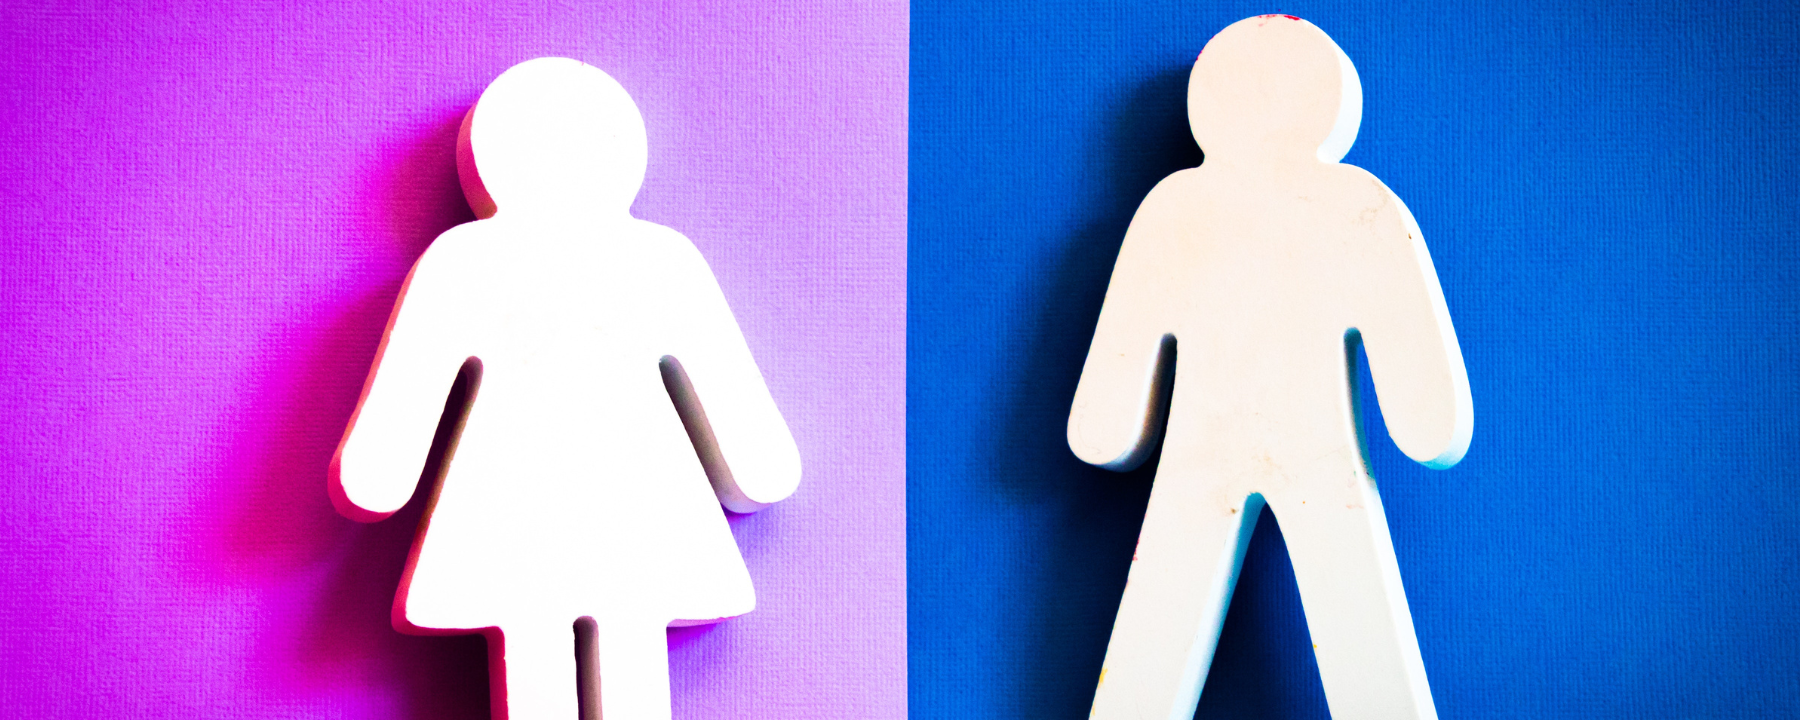 Stereotypical female and male cutout shapes on different coloured backgrounds to illustrate gender differences. Source: Pexels Magda Ehlers